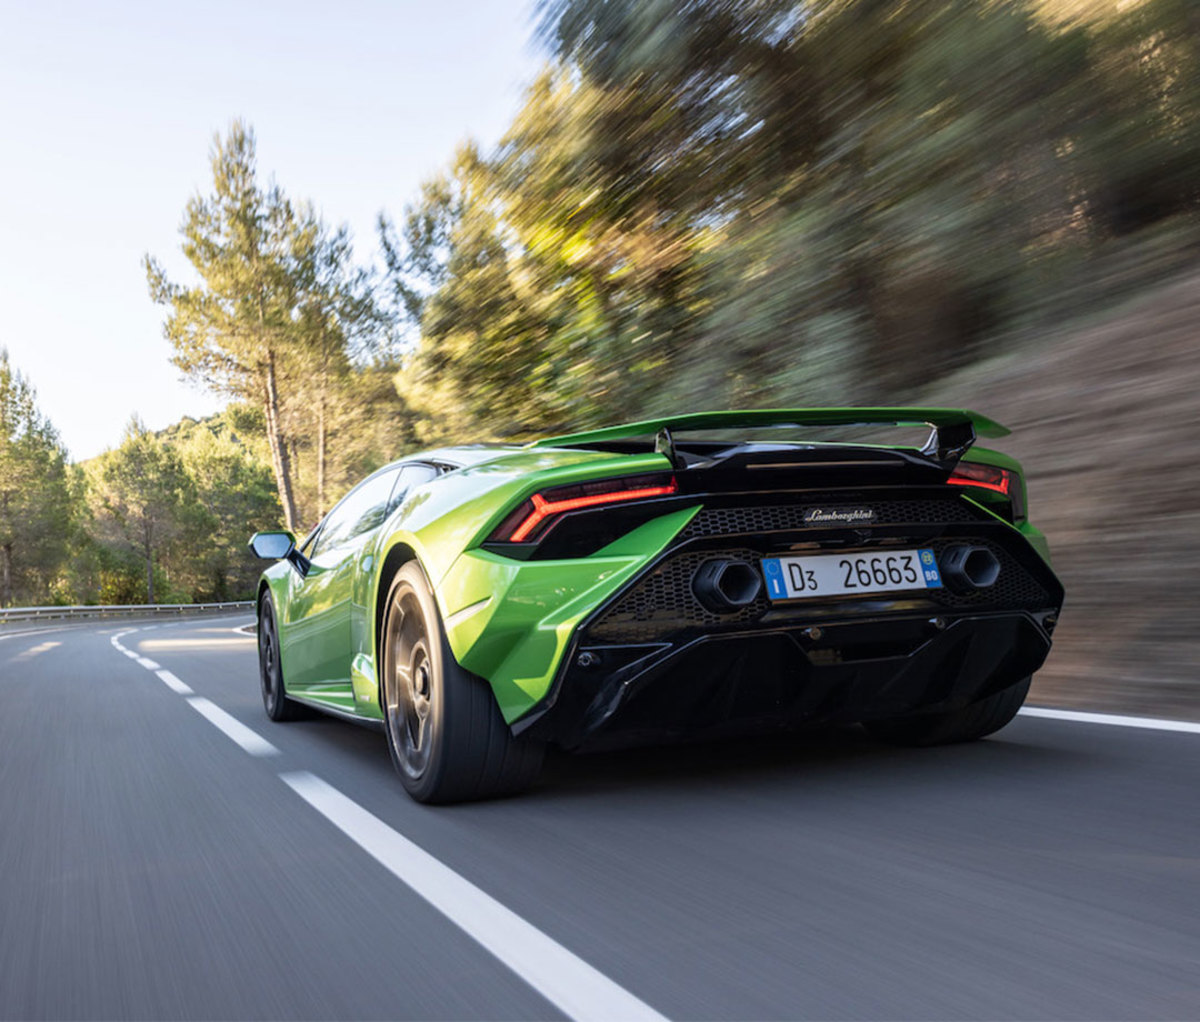 Green sports car on winding road going fast, blurring by trees